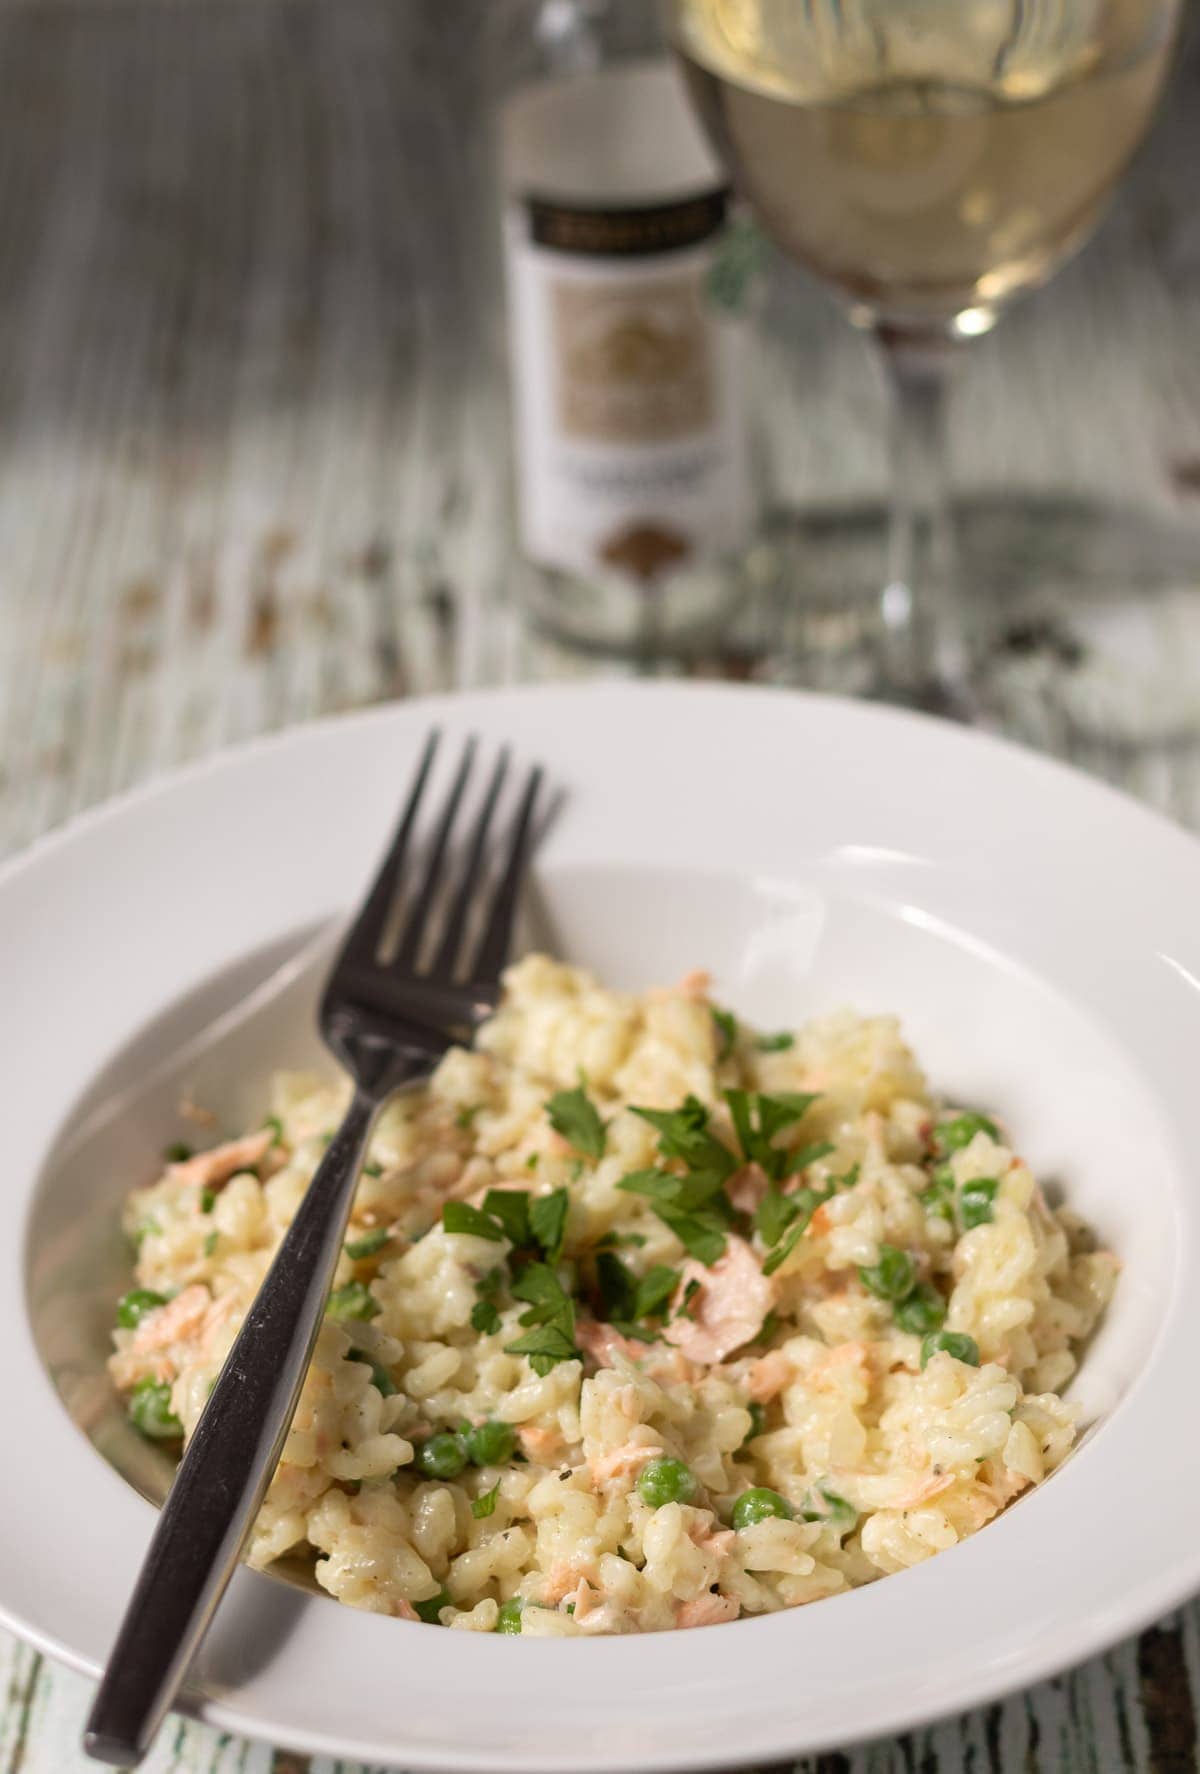 A plate of creamy salmon risotto with peas garnished with chopped parlsey and a fork to the side. A glass of wine and bottle in the background.